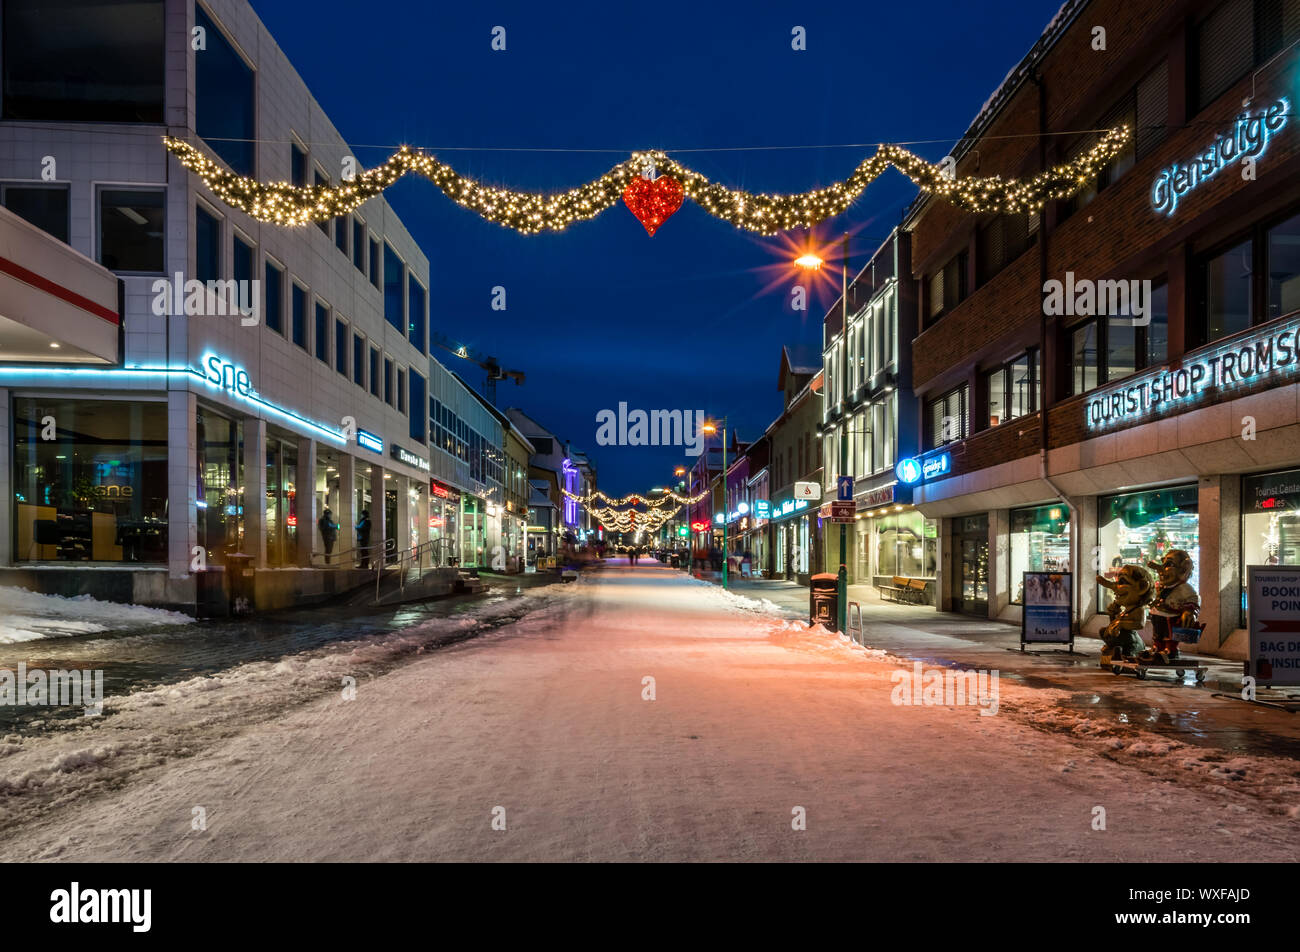 Christmas decorations in Tromso town Stock Photo